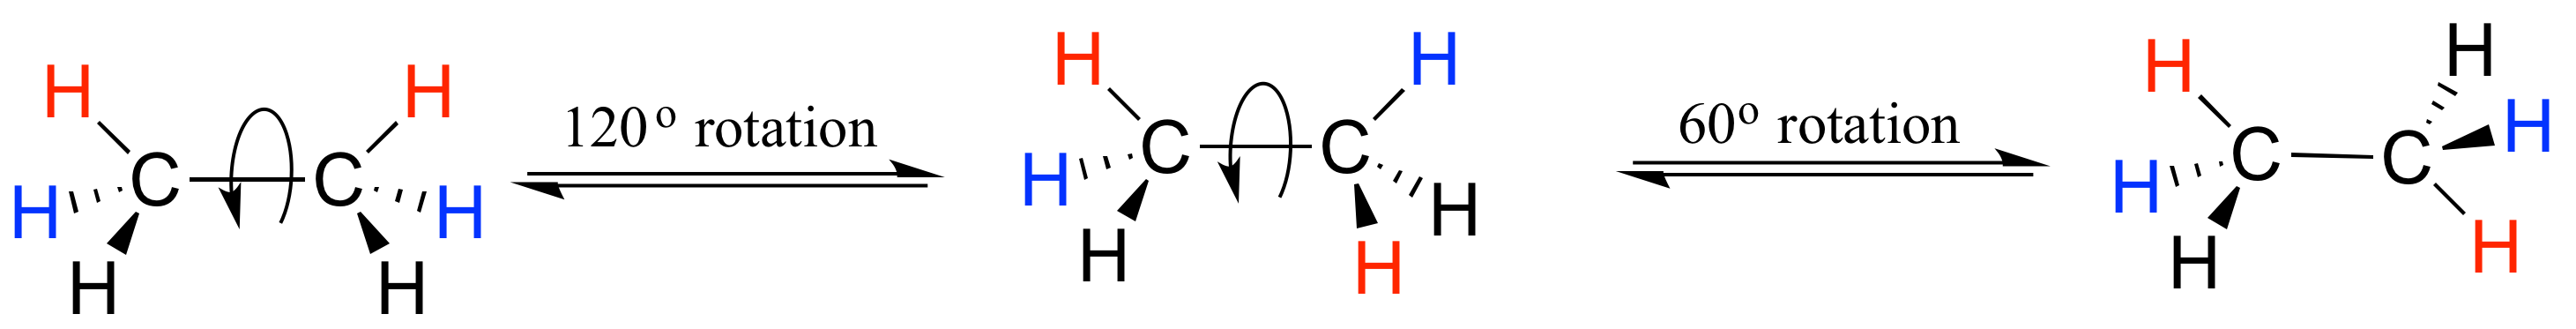 Rotations of ethane. Red hydrogen on solid lines, blue hydrogens on dashes, and black hydrogens on wedges. Rotated 120 degrees. The right carbon now has blue on a solid line, black on a dash, and red on a wedge. Left carbon stays the same. Rotated again by 60 degrees. Left carbon stays the same. Right carbon has black on dash, blue on wedge and red on solid line.